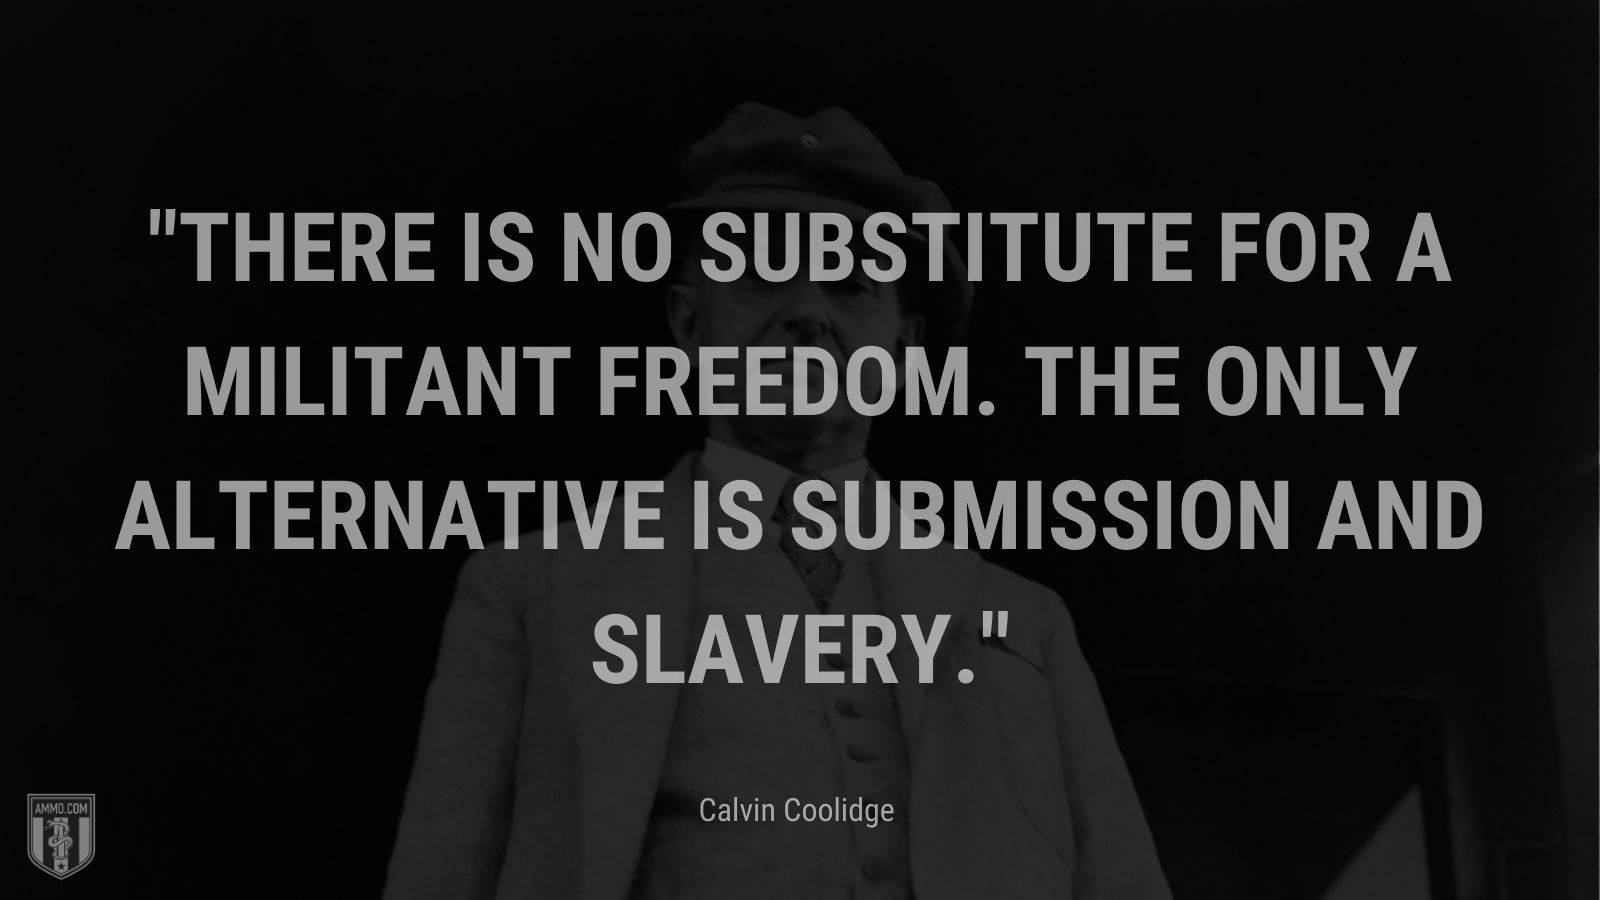 “There is no substitute for a militant freedom. The only alternative is submission and slavery.” - Calvin Coolidge